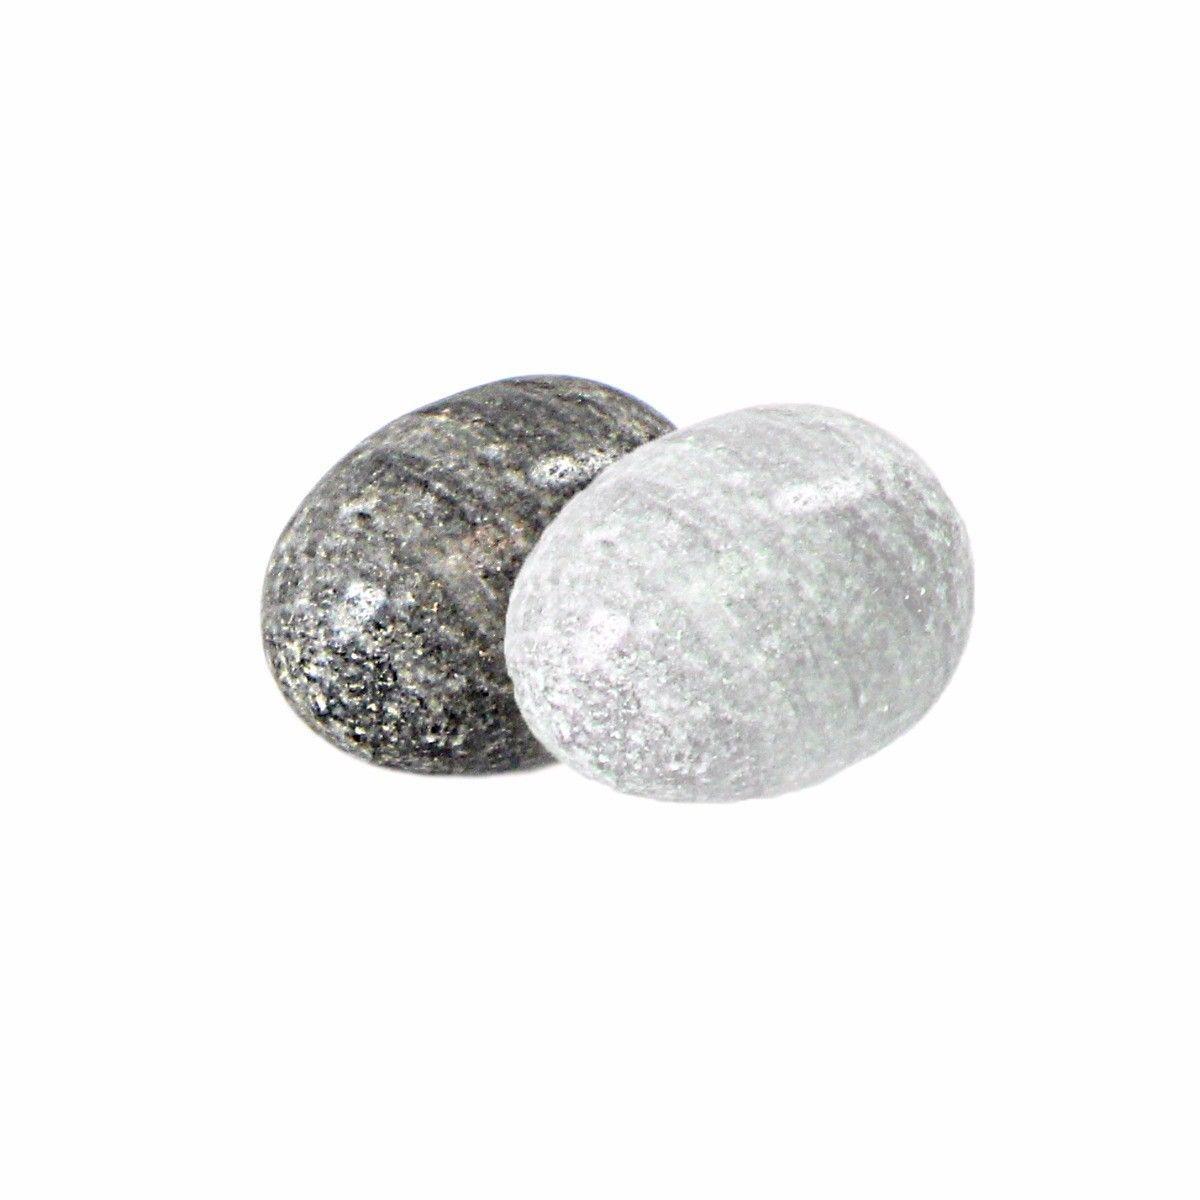 Pack Of 2 Multi Fish Tank Stones Decor, Ideal for Fish And Aquarium Sea Shells 4487 (Large Letter Rate)